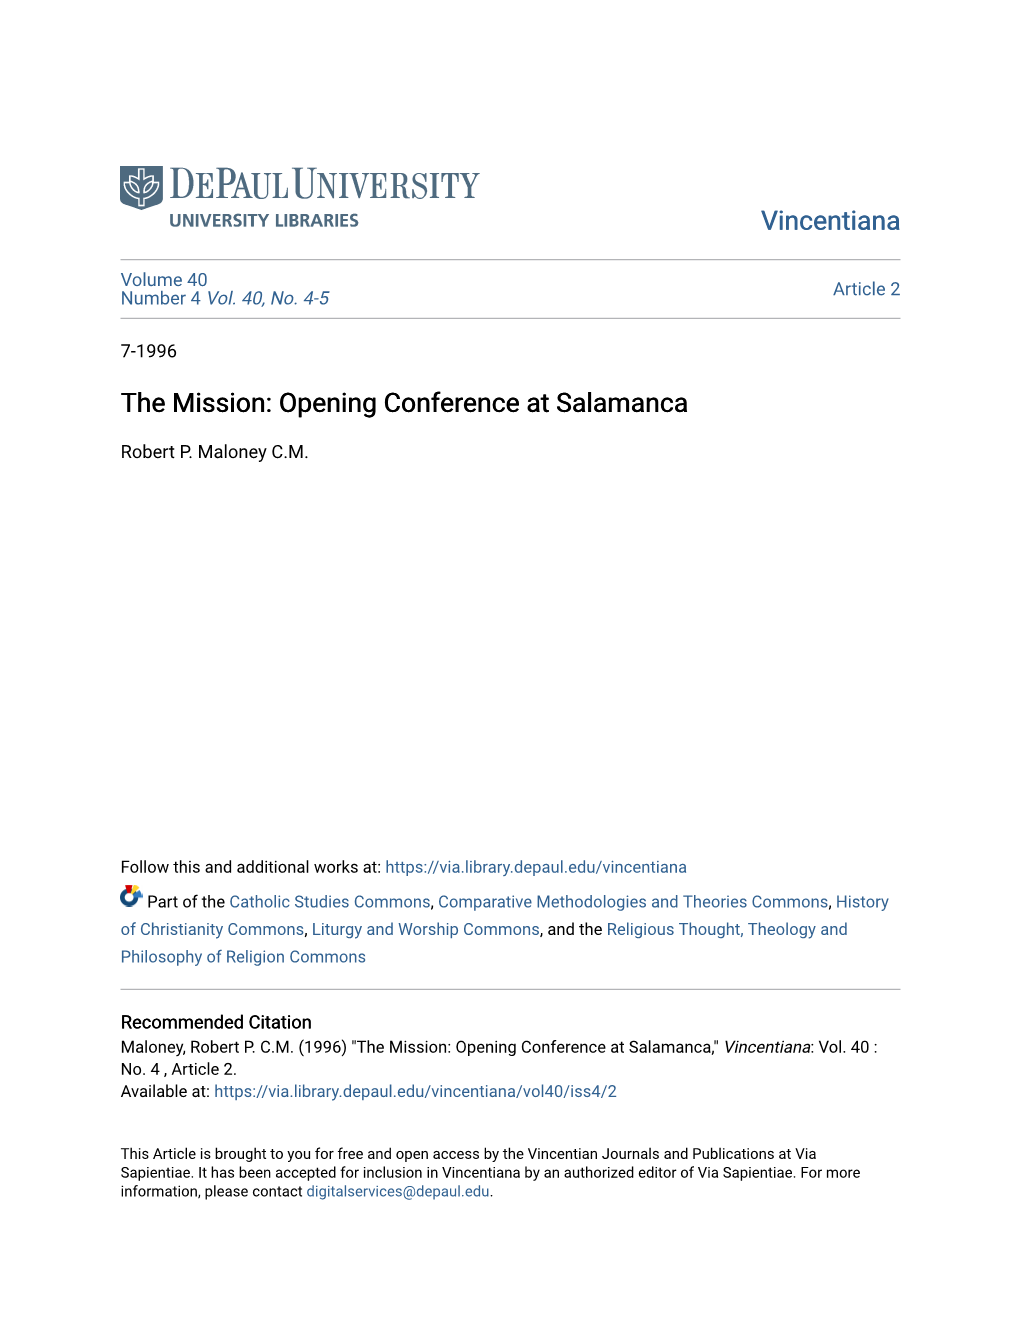 The Mission: Opening Conference at Salamanca